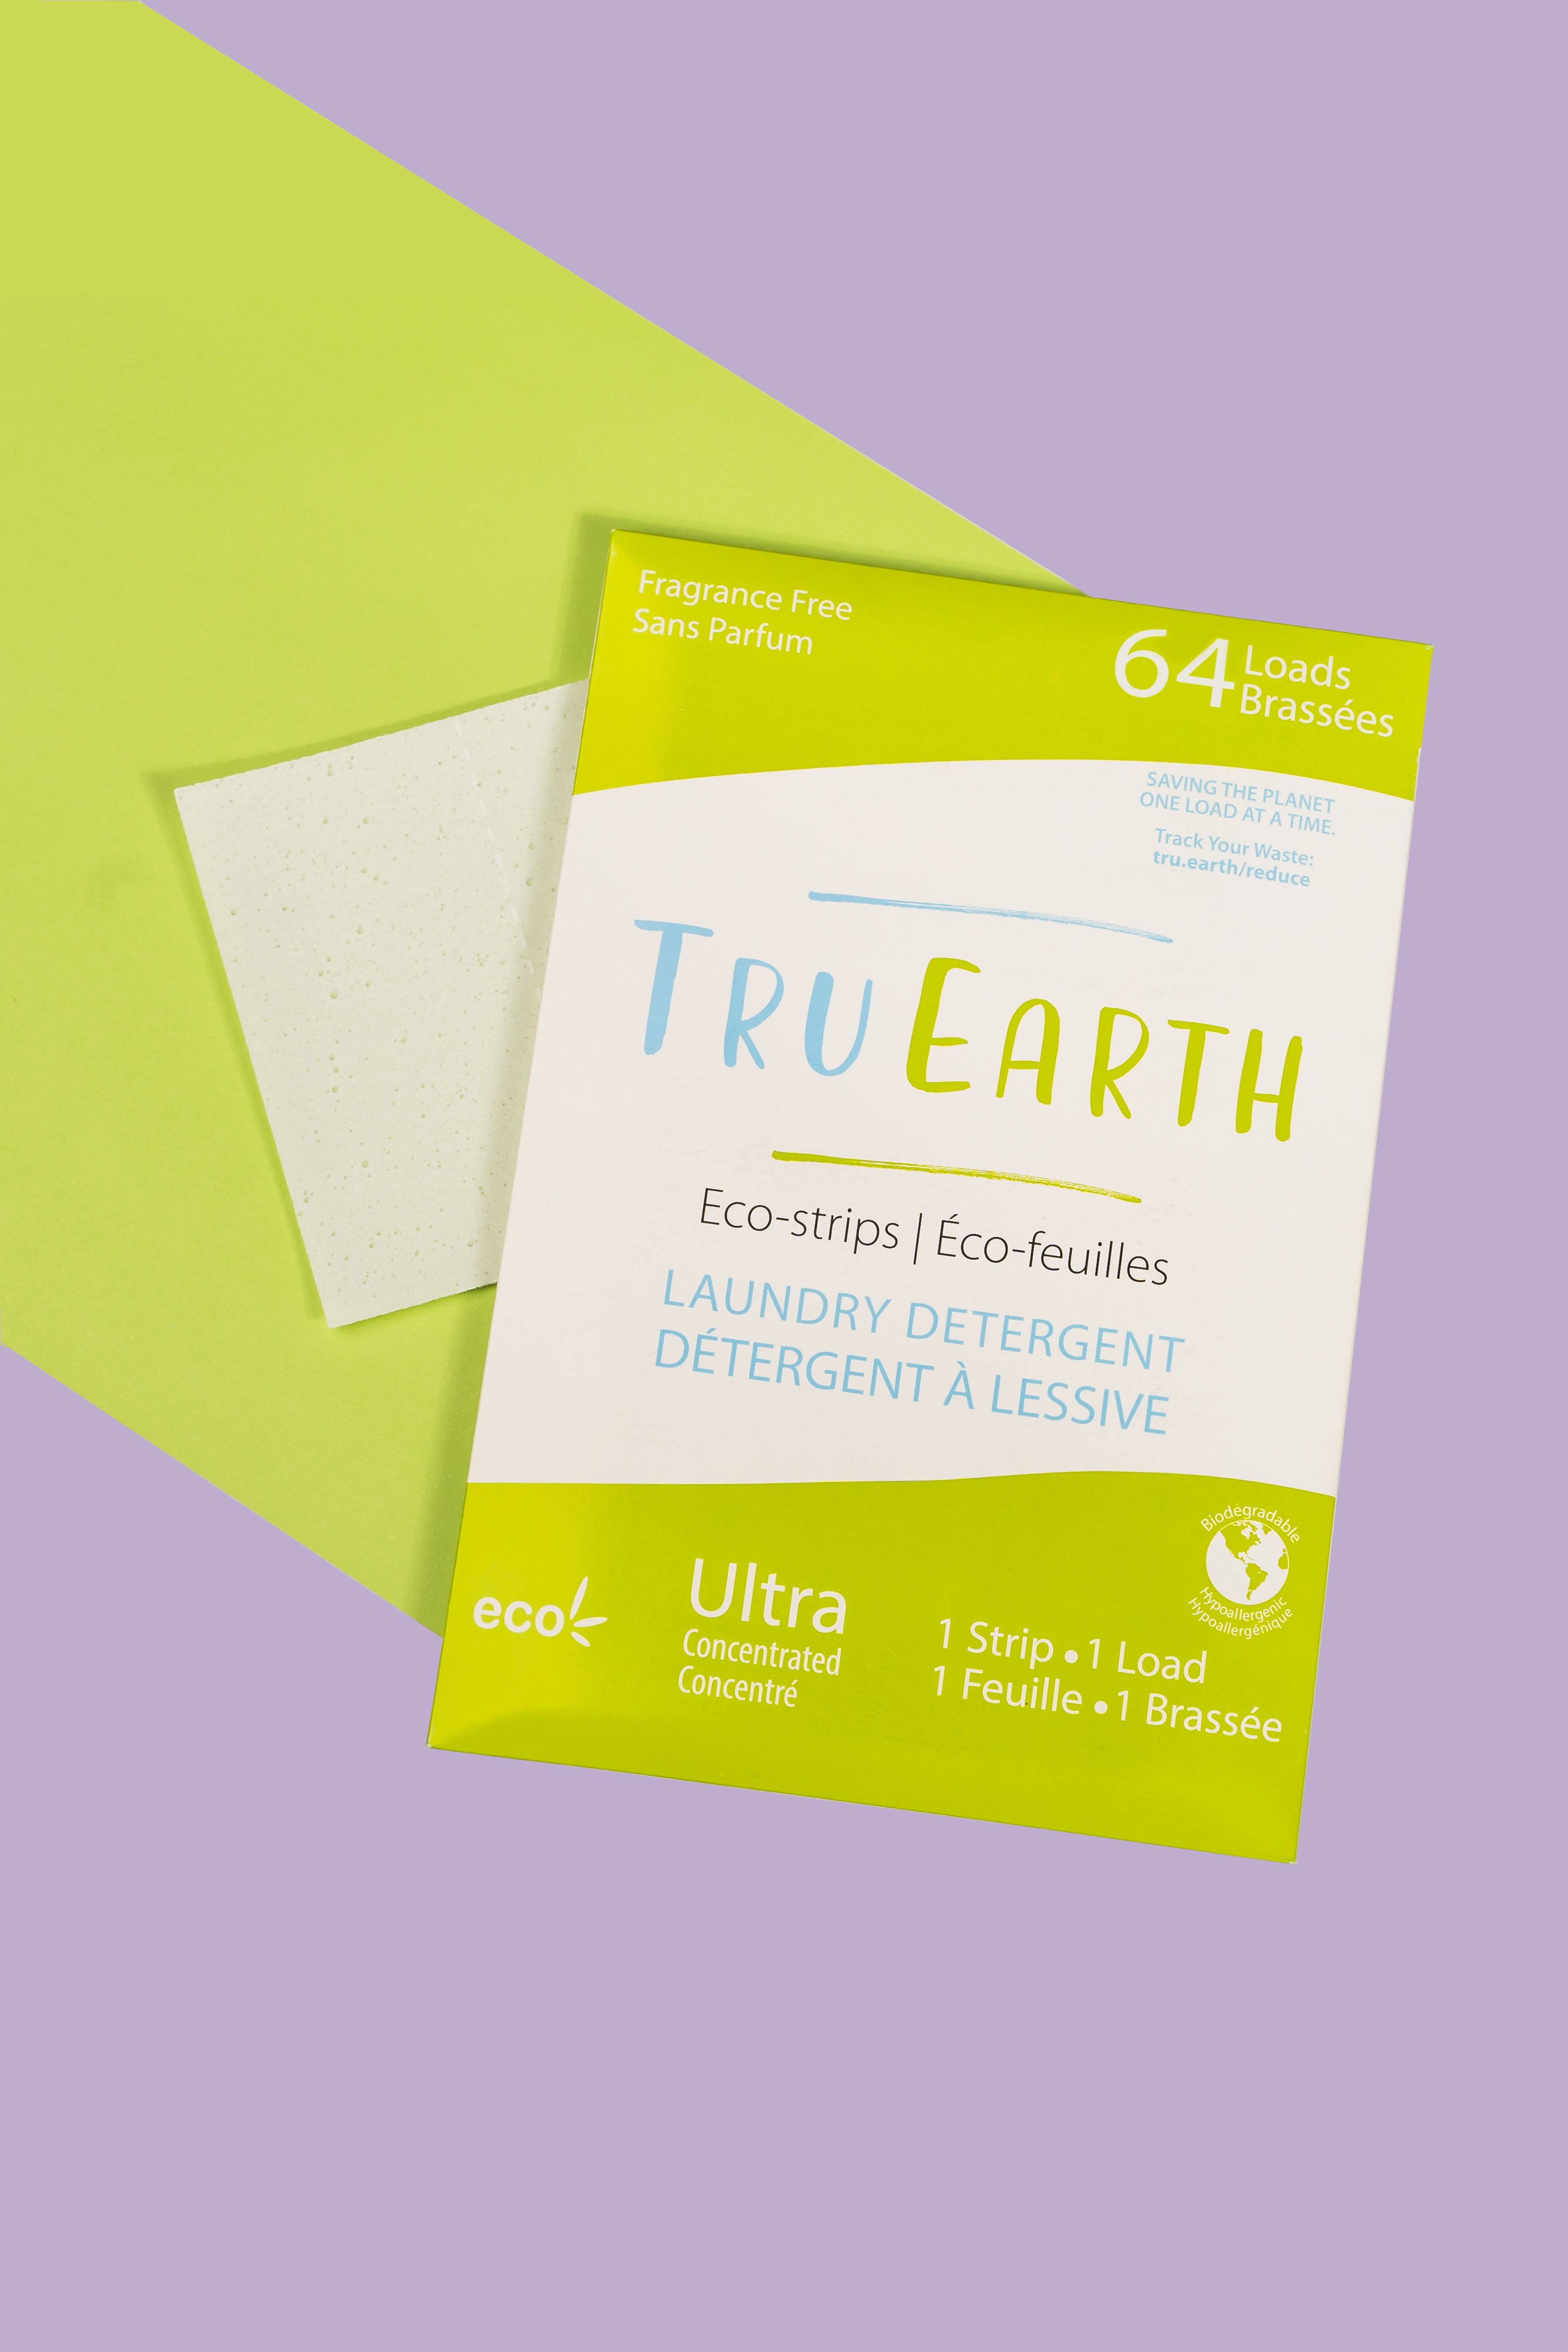 TRU Earth Eco-Strips Laundry Detergent (Fragrance-Free, 64 Loads) - Eco-friendly Ultra Concentrated Hypoallergenic Compostable & Biodegradable